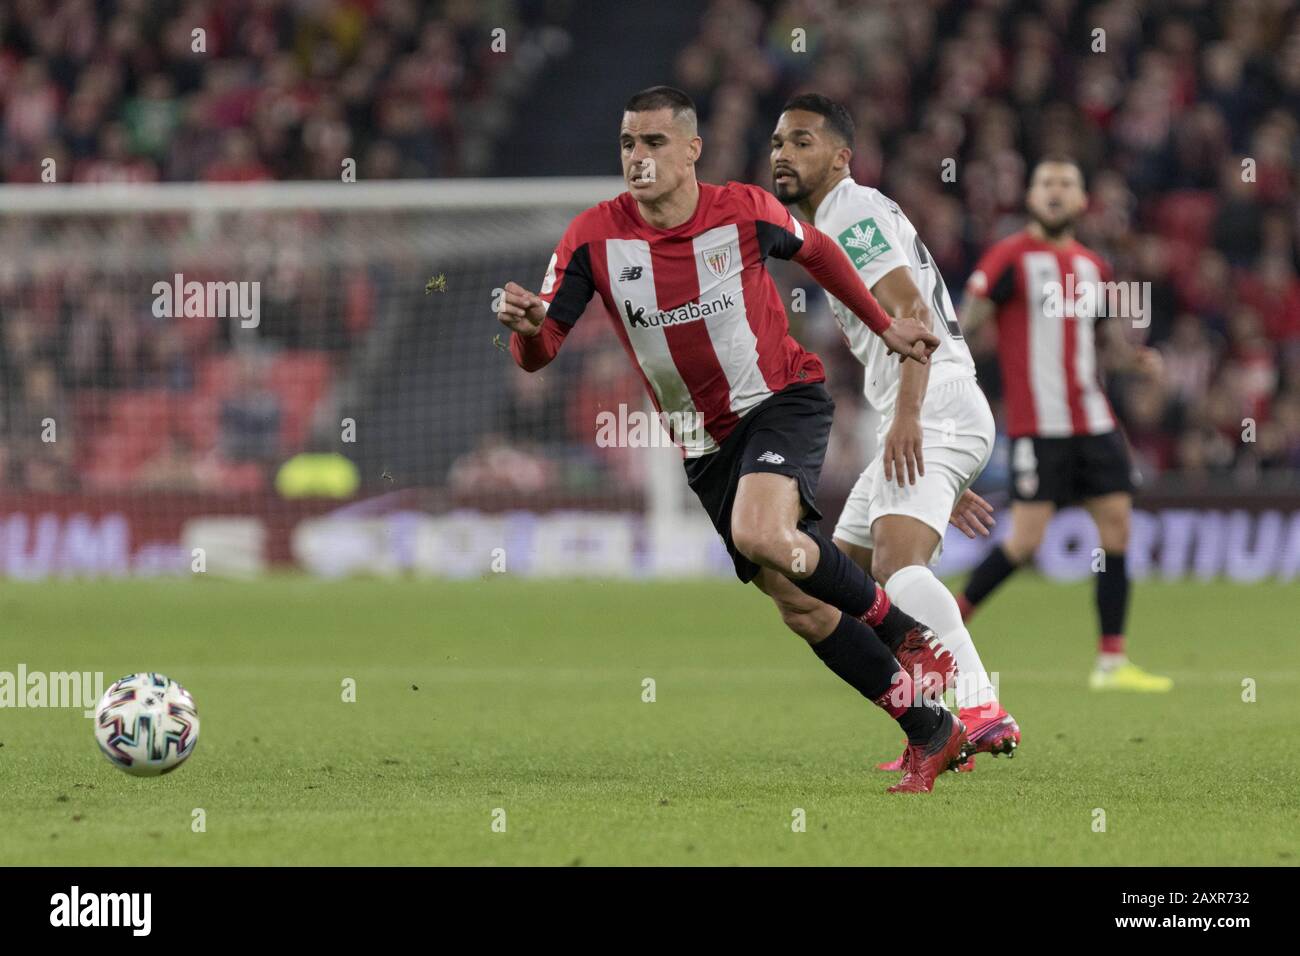 Bilbao, Bizkaia, SPAIN. 12th Feb, 2020. DANI GARCIA (14) tries to run with the ball during the game between Athletic Club and Granada. Athletic Club de Bilbao hosted Granada CF in the going match of the Copa del Rey semifinal at San Mamés stadium.With this victory, Athletic Club faces a good return game at Los CÃrmenes stadium, which will take place on March 4th. Credit: Edu Del Fresno/ZUMA Wire/Alamy Live News Stock Photo